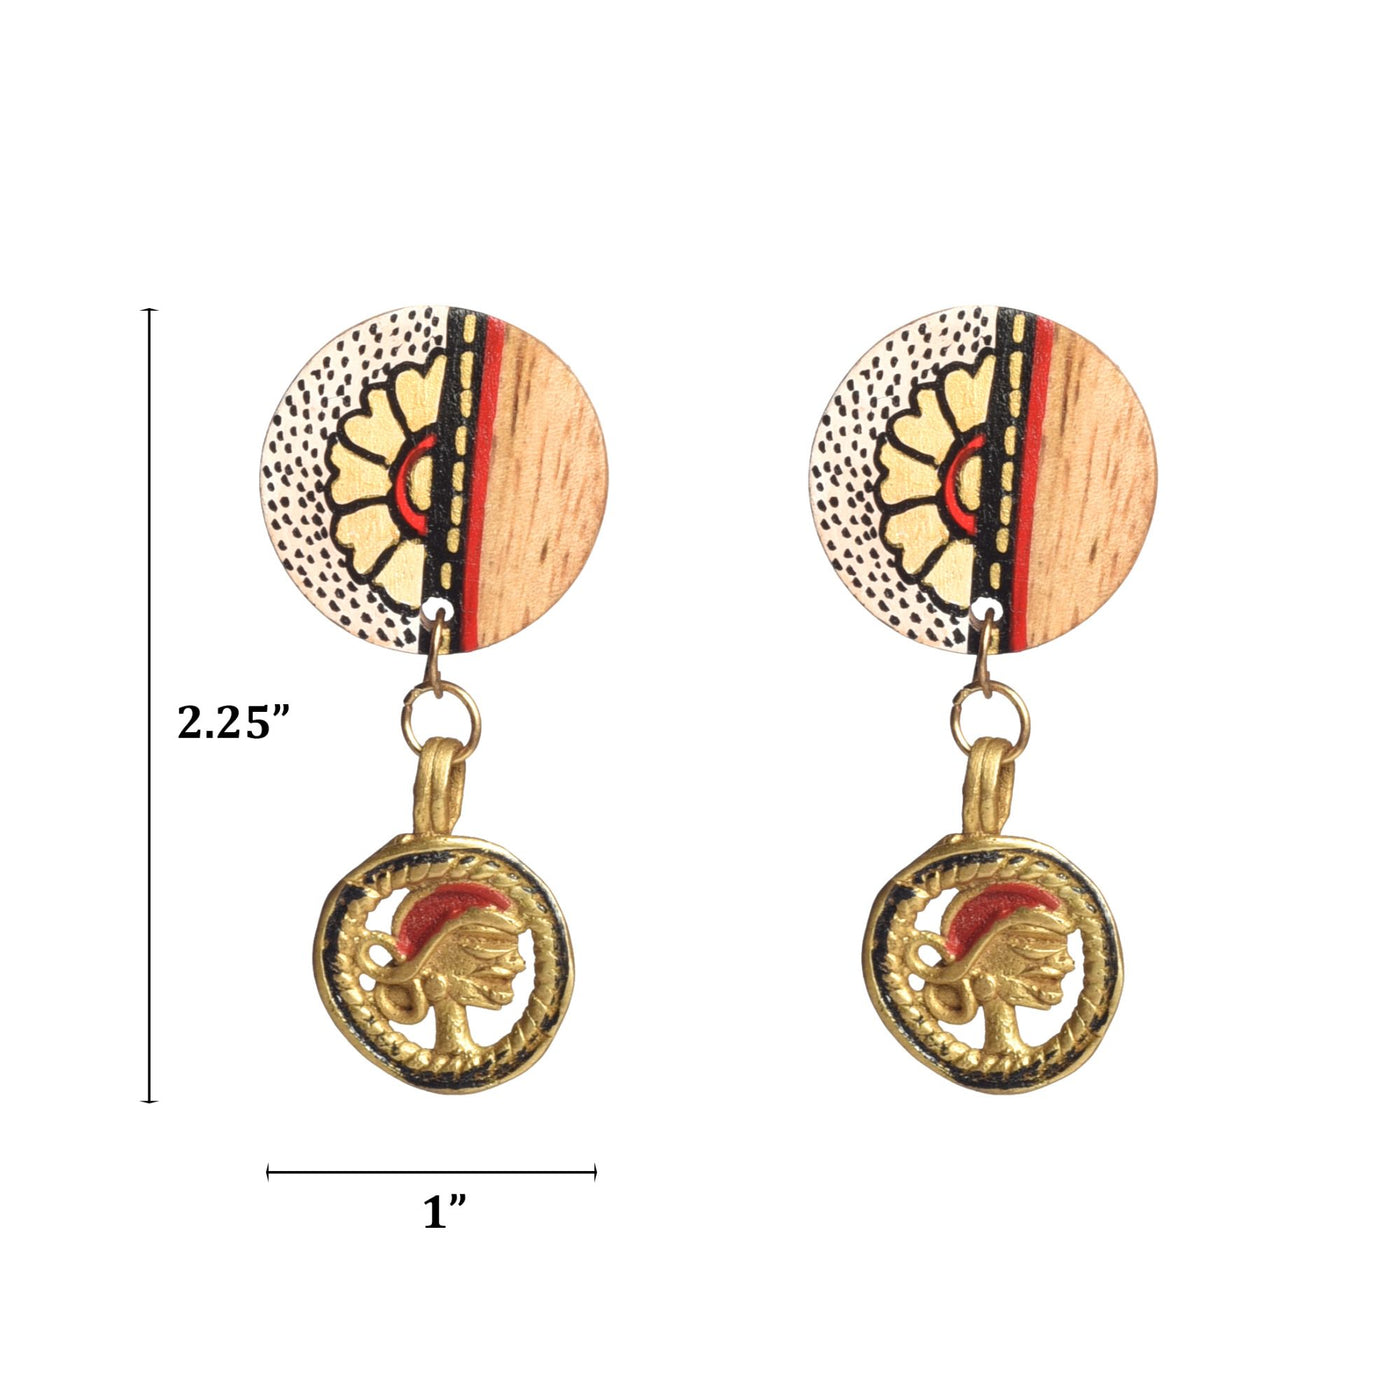 The Star Handcrafted Tribal Earrings - Fashion & Lifestyle - 5